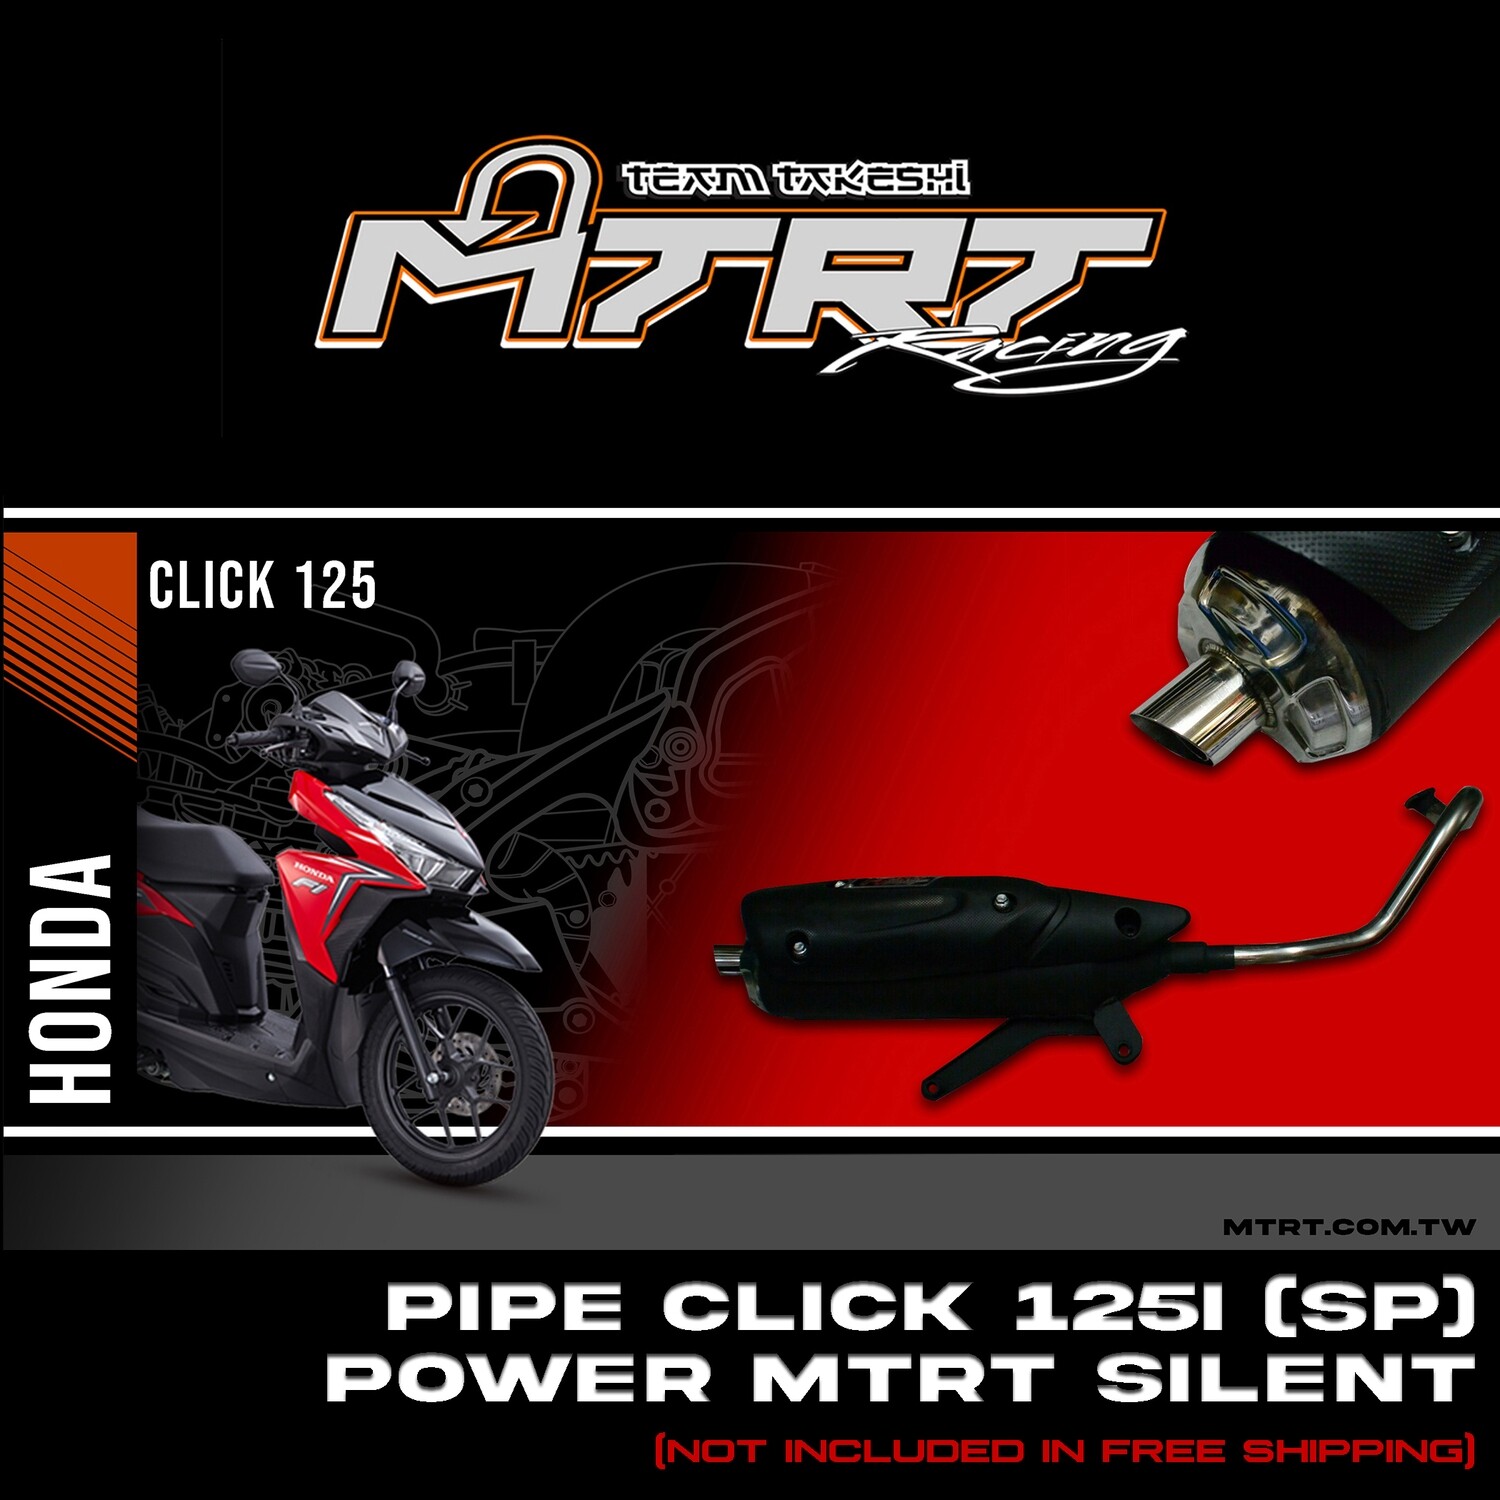 PIPE CLICK125i (SP) POWER MTRT SILENT